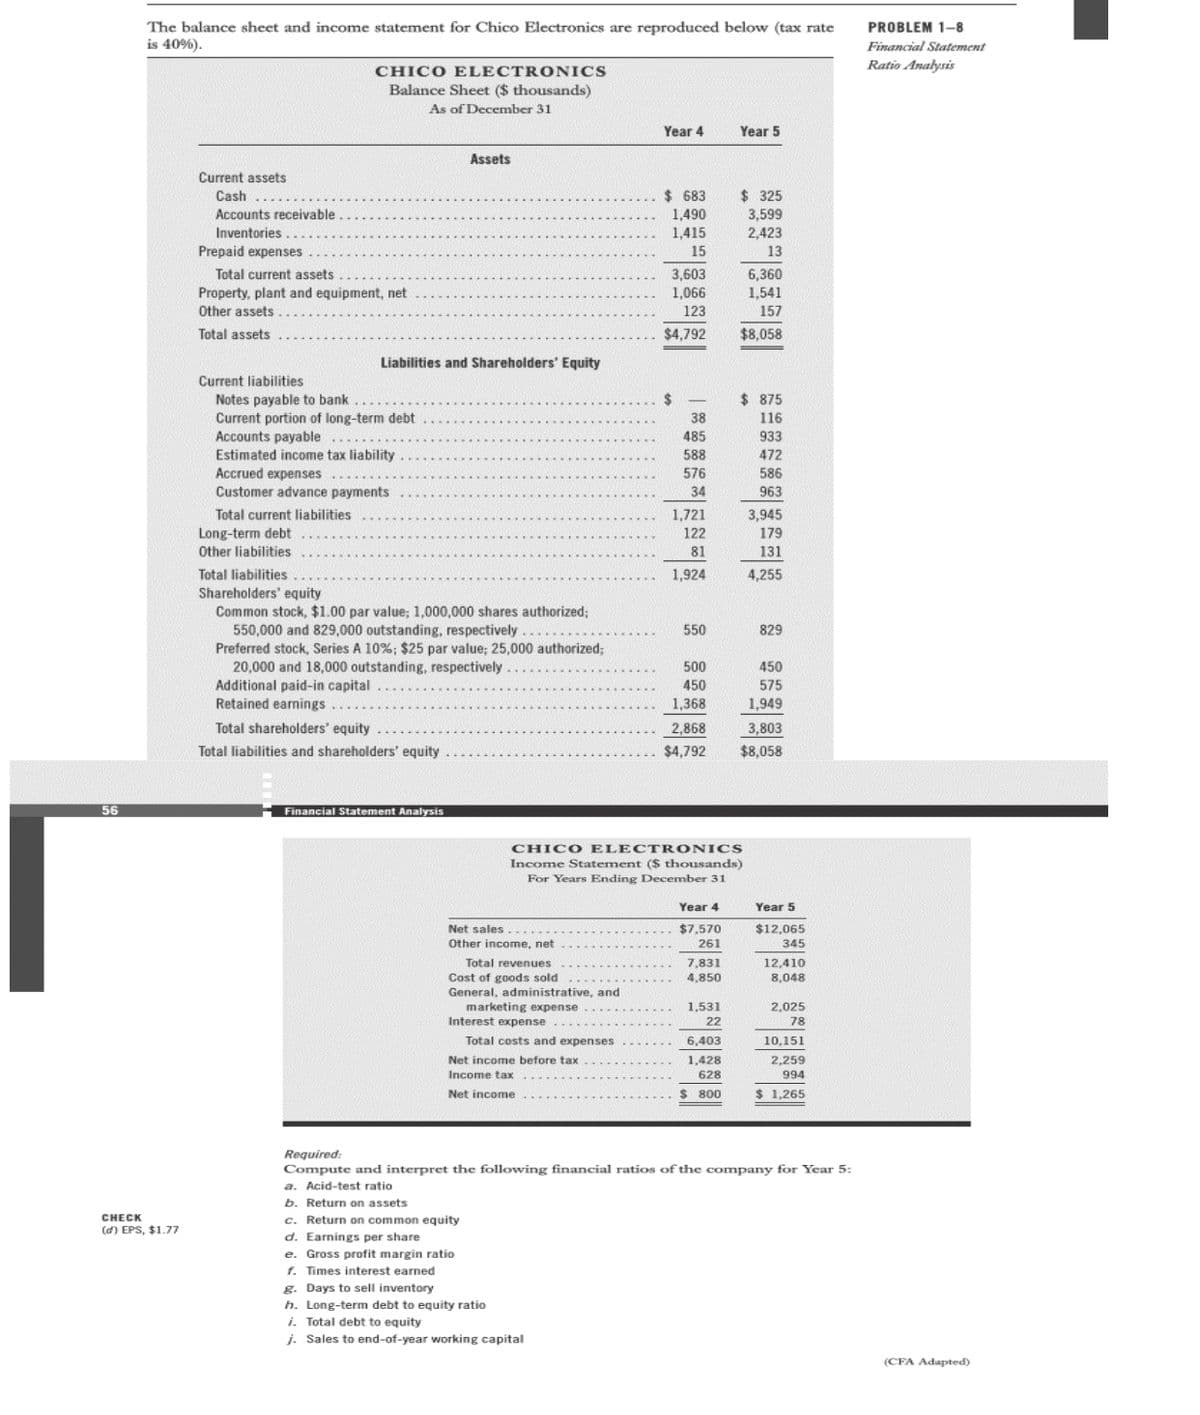 The balance sheet and income statement for Chico Electronics are reproduced below (tax rate
is 40%).
PROBLEM 1-8
Financial Statement
Ratio Analysis
CHICO ELECTRONICS
Balance Sheet ($ thousands)
As of December 31
Year 4
Year 5
Assets
Current assets
$ 683
$ 325
3,599
2,423
Cash
1,490
1,415
Accounts receivable
Inventories
Prepaid expenses
15
13
3,603
1,066
6,360
1,541
157
Total current assets
Property, plant and equipment, net
Other assets
123
Total assets
$4,792
$8,058
Liabilities and Shareholders' Equity
Current liabilities
2$
$ 875
Notes payable to bank
Current portion of long-term debt
Accounts payable
Estimated income tax liability
Accrued expenses ..
Customer advance payments
38
116
485
933
588
472
576
586
34
963
Total current liabilities
1,721
3,945
Long-term debt
Other liabilities
122
179
81
131
Total liabilities
1,924
4,255
Shareholders' equity
Common stock, $1.00 par value; 1,000,000 shares authorized;
550,000 and 829,000 outstanding, respectively
Preferred stock, Series A 10%; $25 par value; 25,000 authorized;
20,000 and 18,000 outstanding, respectively
Additional paid-in capital
Retained earnings
550
829
500
450
450
575
1,368
1,949
Total shareholders' equity
2,868
3,803
Total liabilities and shareholders' equity
$4,792
$8,058
56
Financial Statement Analysis
CHICO ELECTR ONICS
Income Statement ($ thousands)
For Years Ending December 31
Year 4
Year 5
Net sales
$7,570
$12,065
Other income, net
261
345
7,831
12,410
8,048
Total revenues
Cost of goods sold
4,850
General, administrative, and
marketing expense
Interest expense
1,531
2,025
22
78
Total costs and expenses
6,403
10,151
Net income before tax
1,428
2.259
Income tax
628
994
Net income
800
$ 1.265
Required:
Compute and interpret the following financial ratios of the company for Year 5:
a. Acid-test ratio
b. Return on assets
c. Return on common equity
d. Earnings per share
e. Gross profit margin ratio
f. Times interest earned
g. Days to sell inventory
h. Long-term debt to equity ratio
i. Total debt to equity
j. Sales to end-of-year working capital
CHECK
(d) EPS, $1.77
(CFA Adapted)
